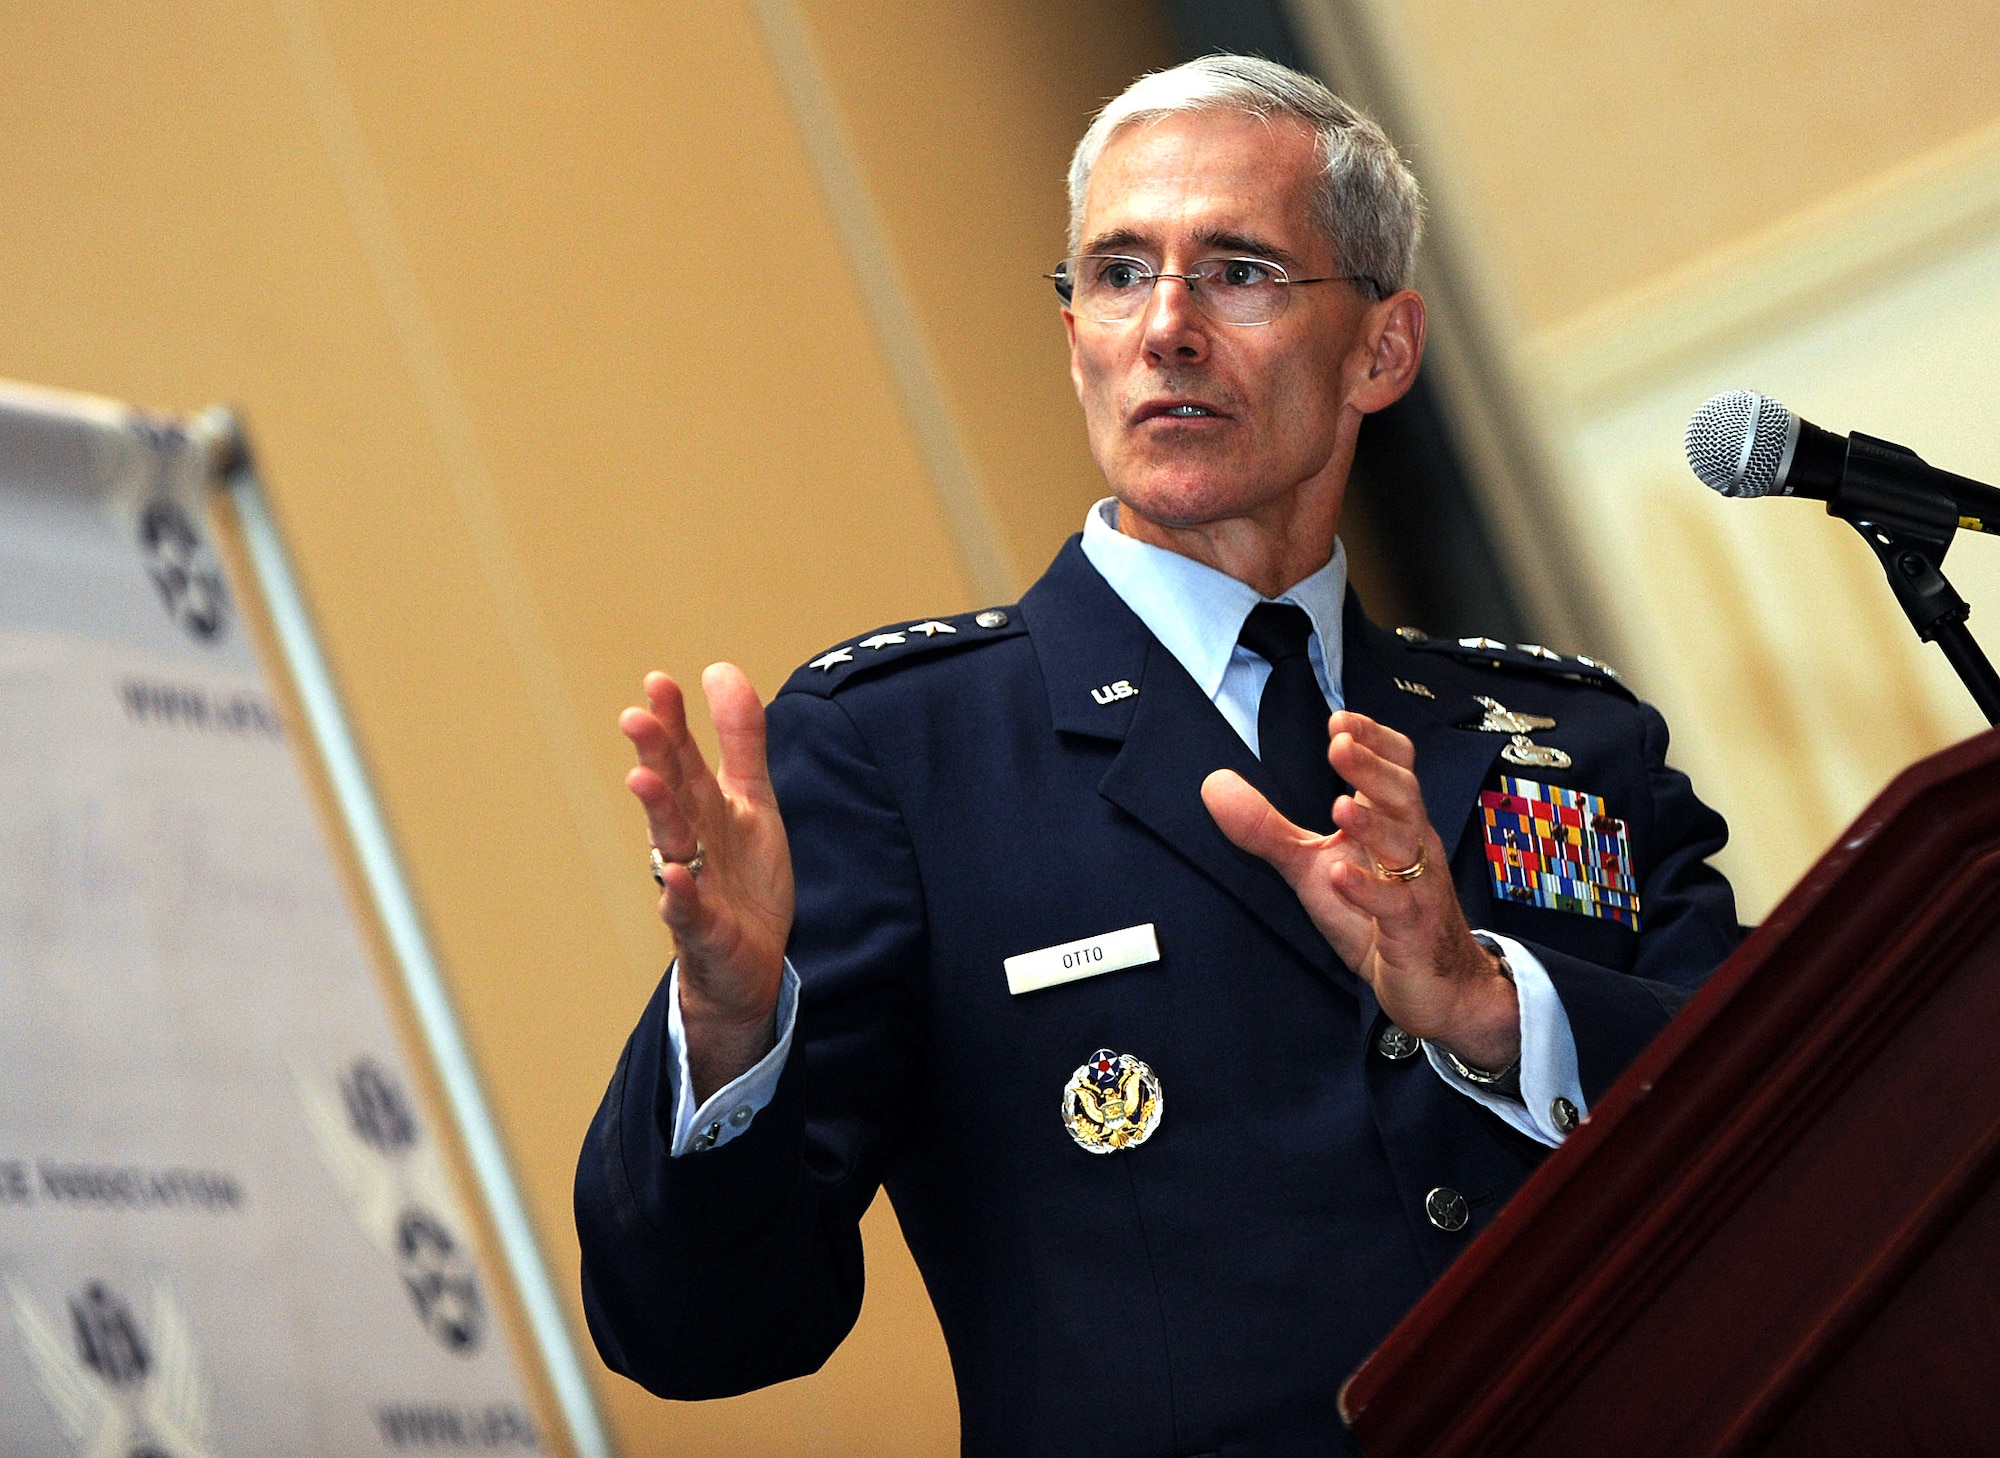 Lt. Gen. Robert P. Otto speaks about the beginnings of Air Force Intelligence, Surveillance and Response in the Air Force and where ISR is headed now Sept. 17, 2013, at the Air Force Association Air & Space Conference and Technology Exposition, Washington, D.C. Looking at the historical events, Otto showed the ways the Air Force can move forward in current times. Otto is Deputy Chief of Staff for ISR at Headquarters U.S. Air Force, Washington D.C. (U.S. Air Force photo/Airman 1st Class Aaron Stout)